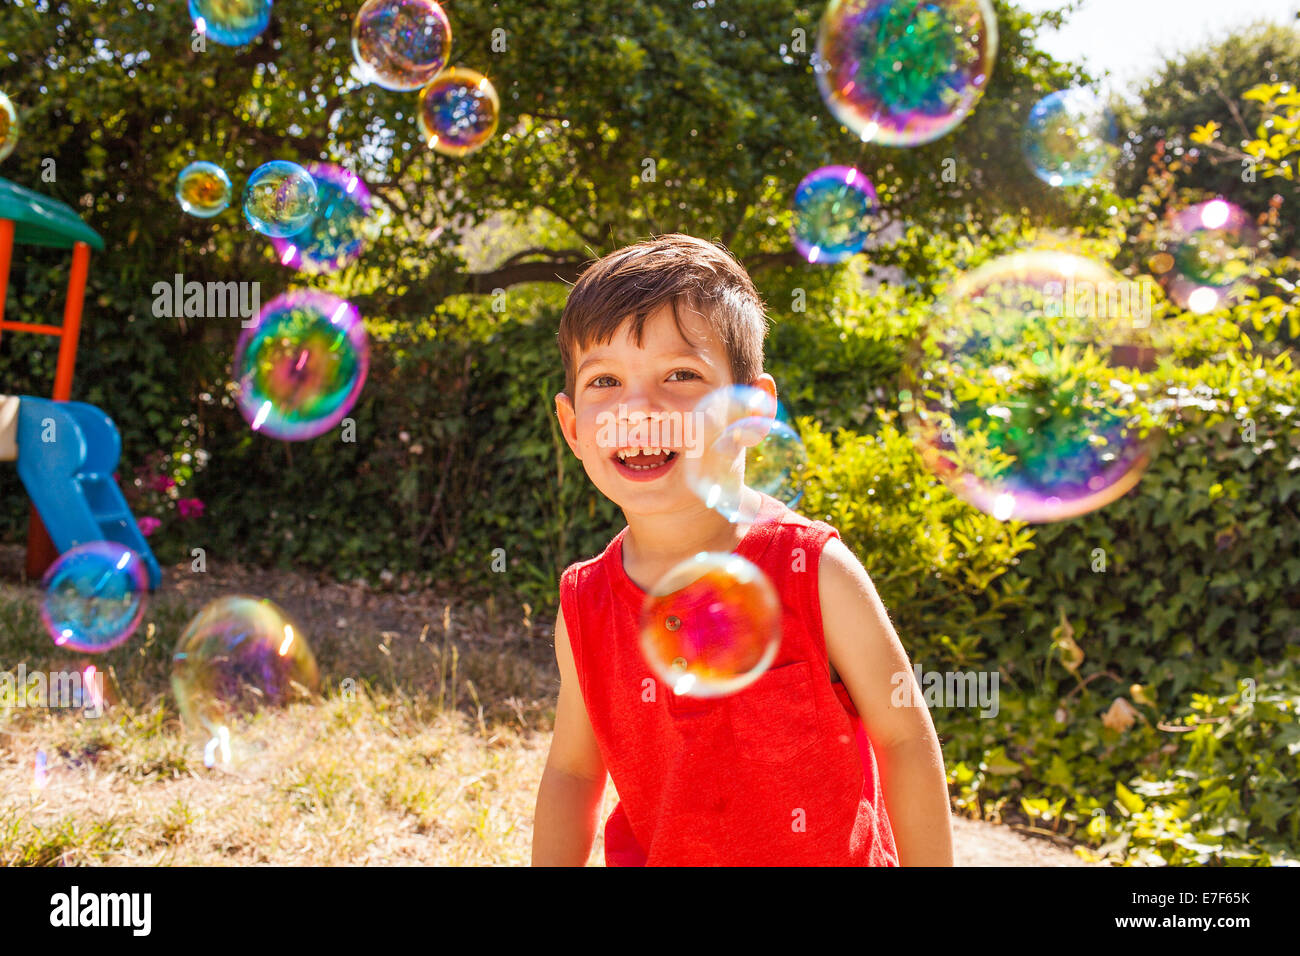 Mixed race boy playing with bubbles in backyard Stock Photo